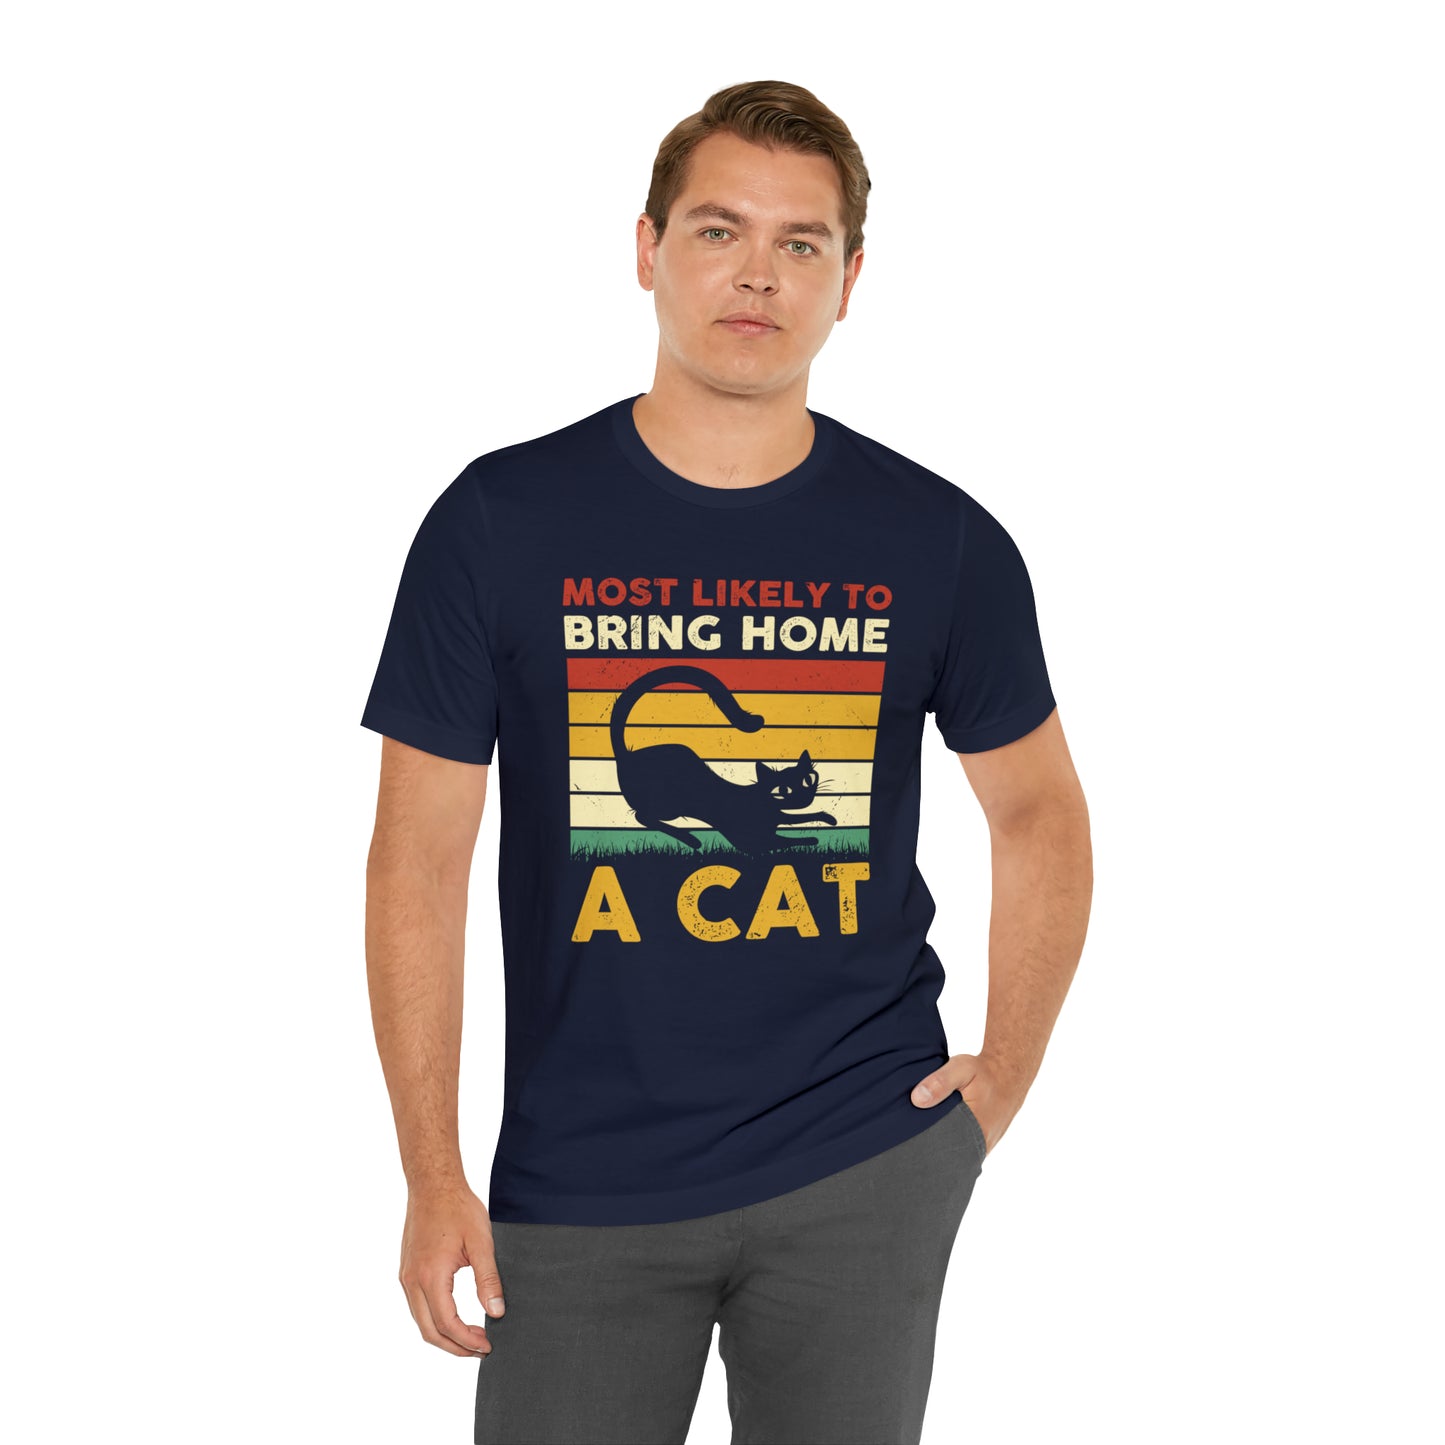 Most Likely to Bring Home a Cat Short Sleeve T-shirt